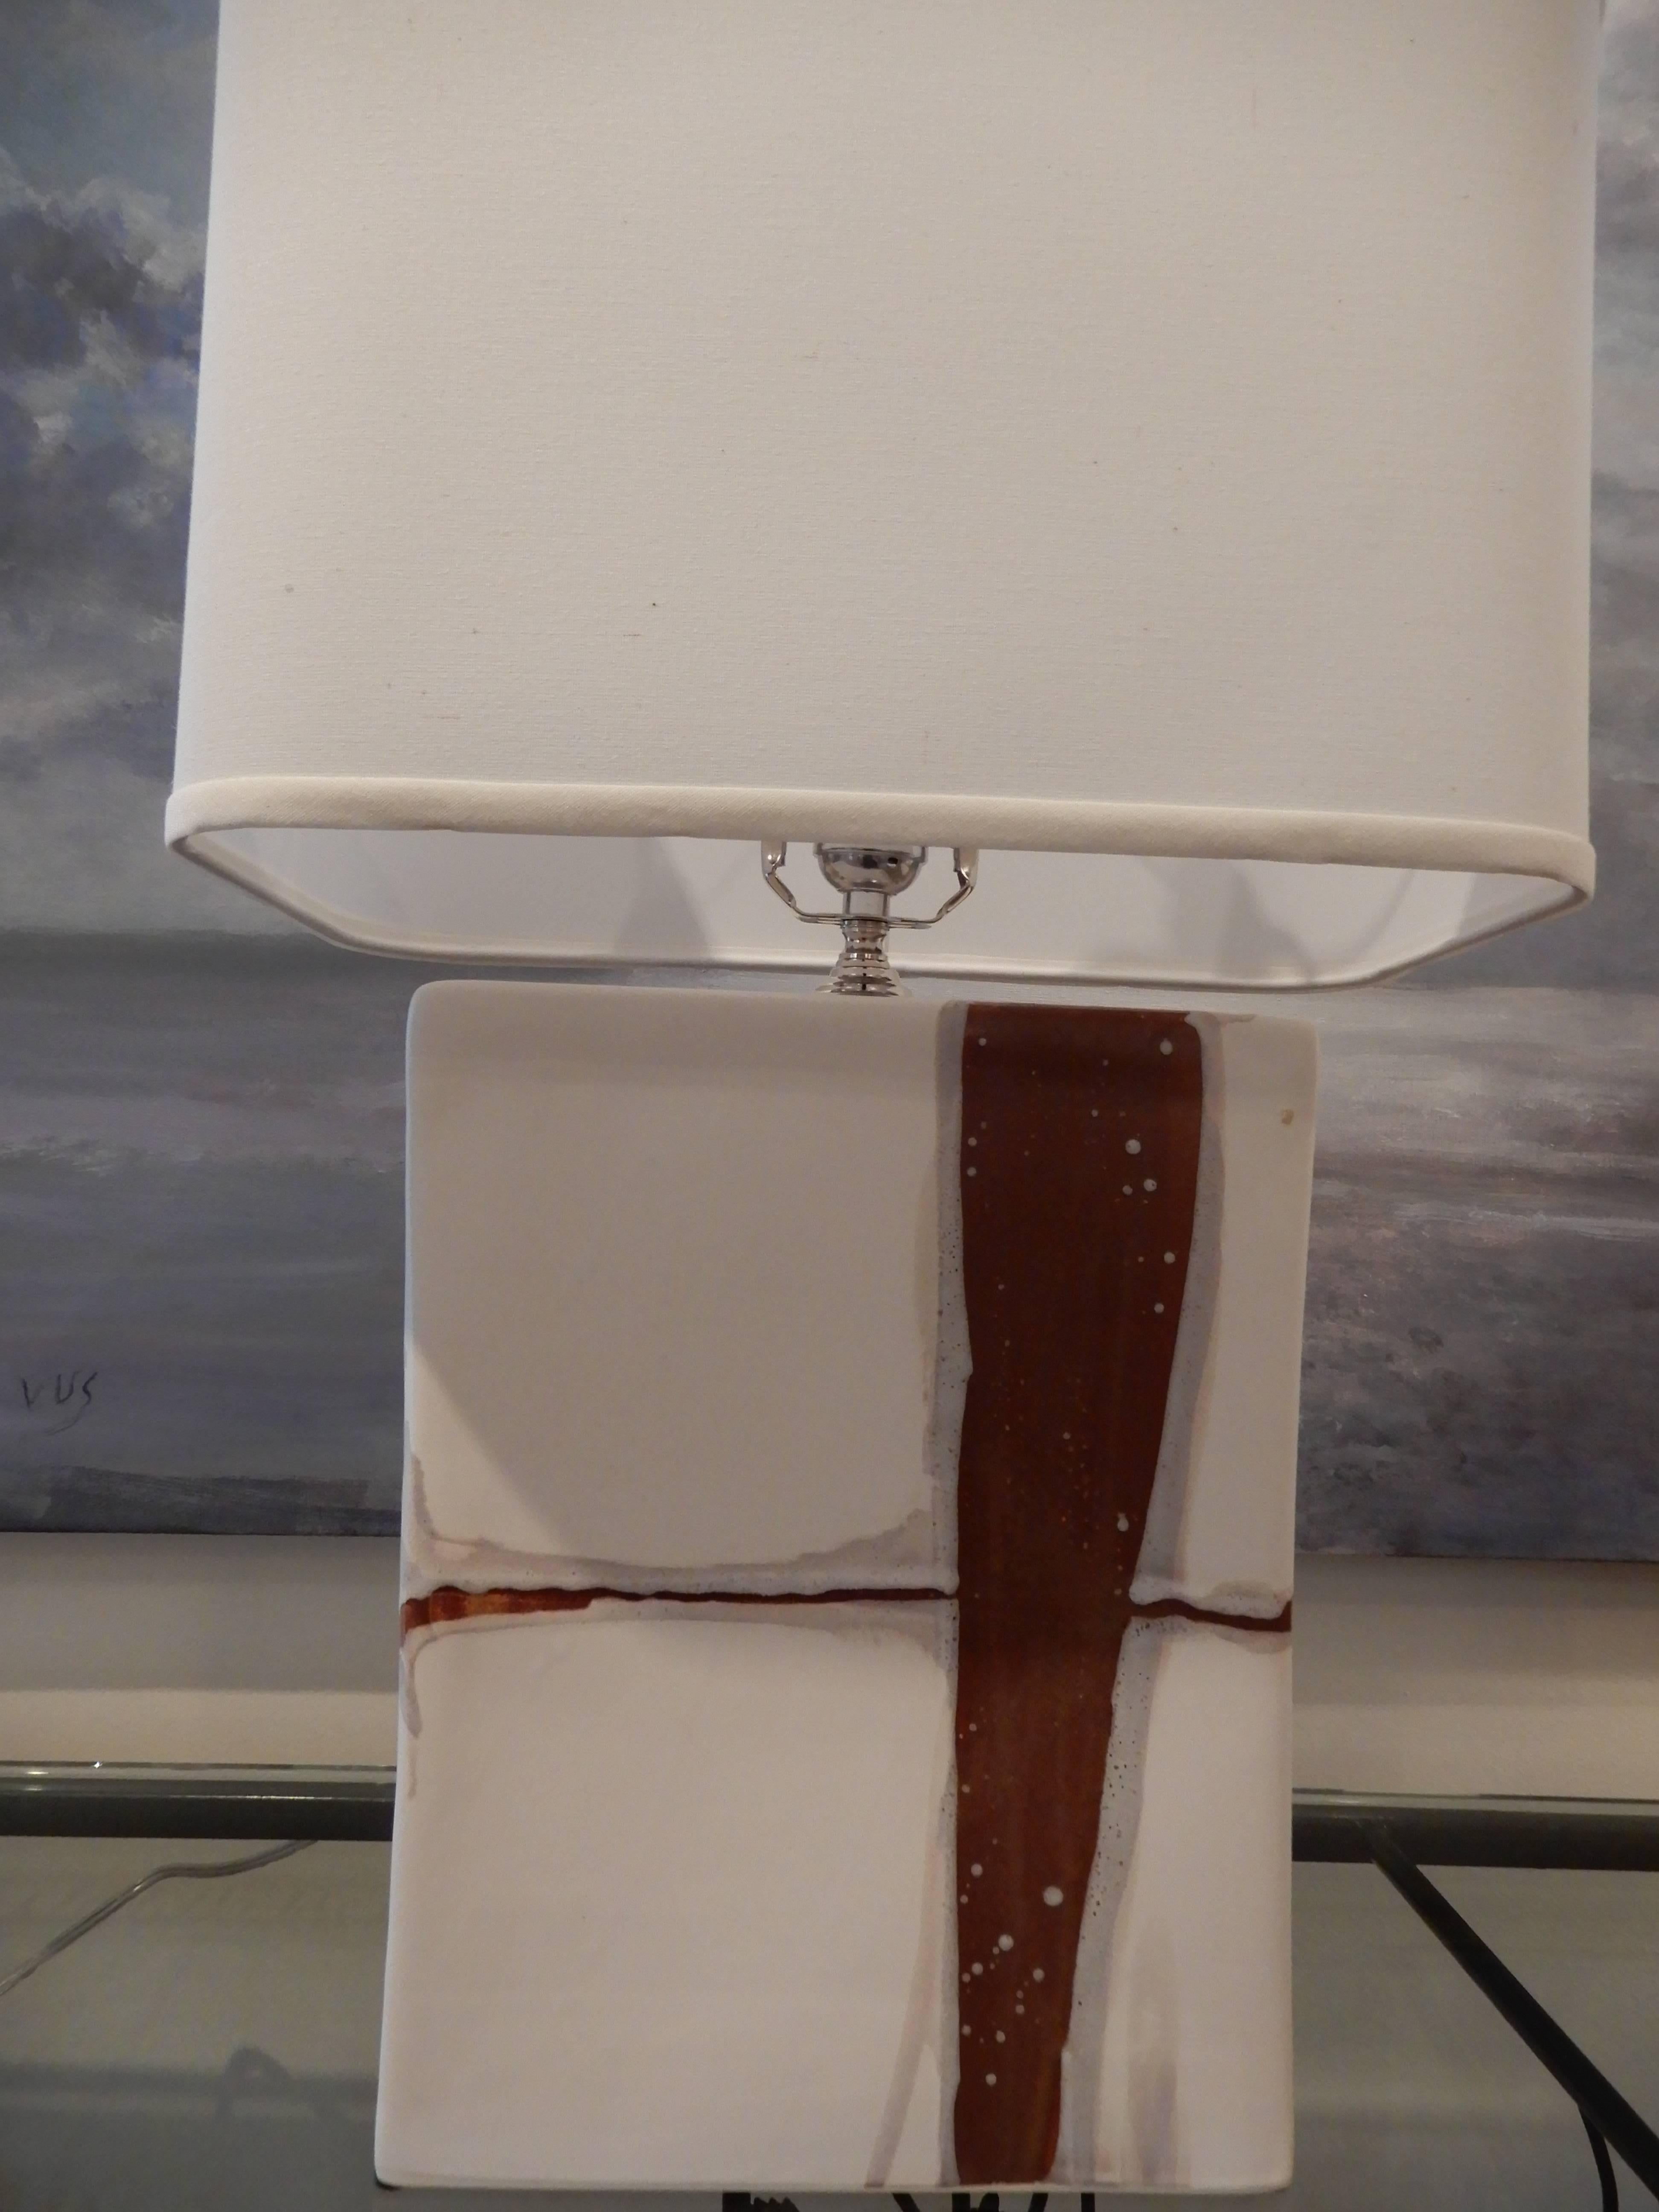  Pair of handcrafted artisan modern lamps.
Glazed ceramic with hand painted art work.
A white linen rectangle shade. Three way switch, two available, made to order.